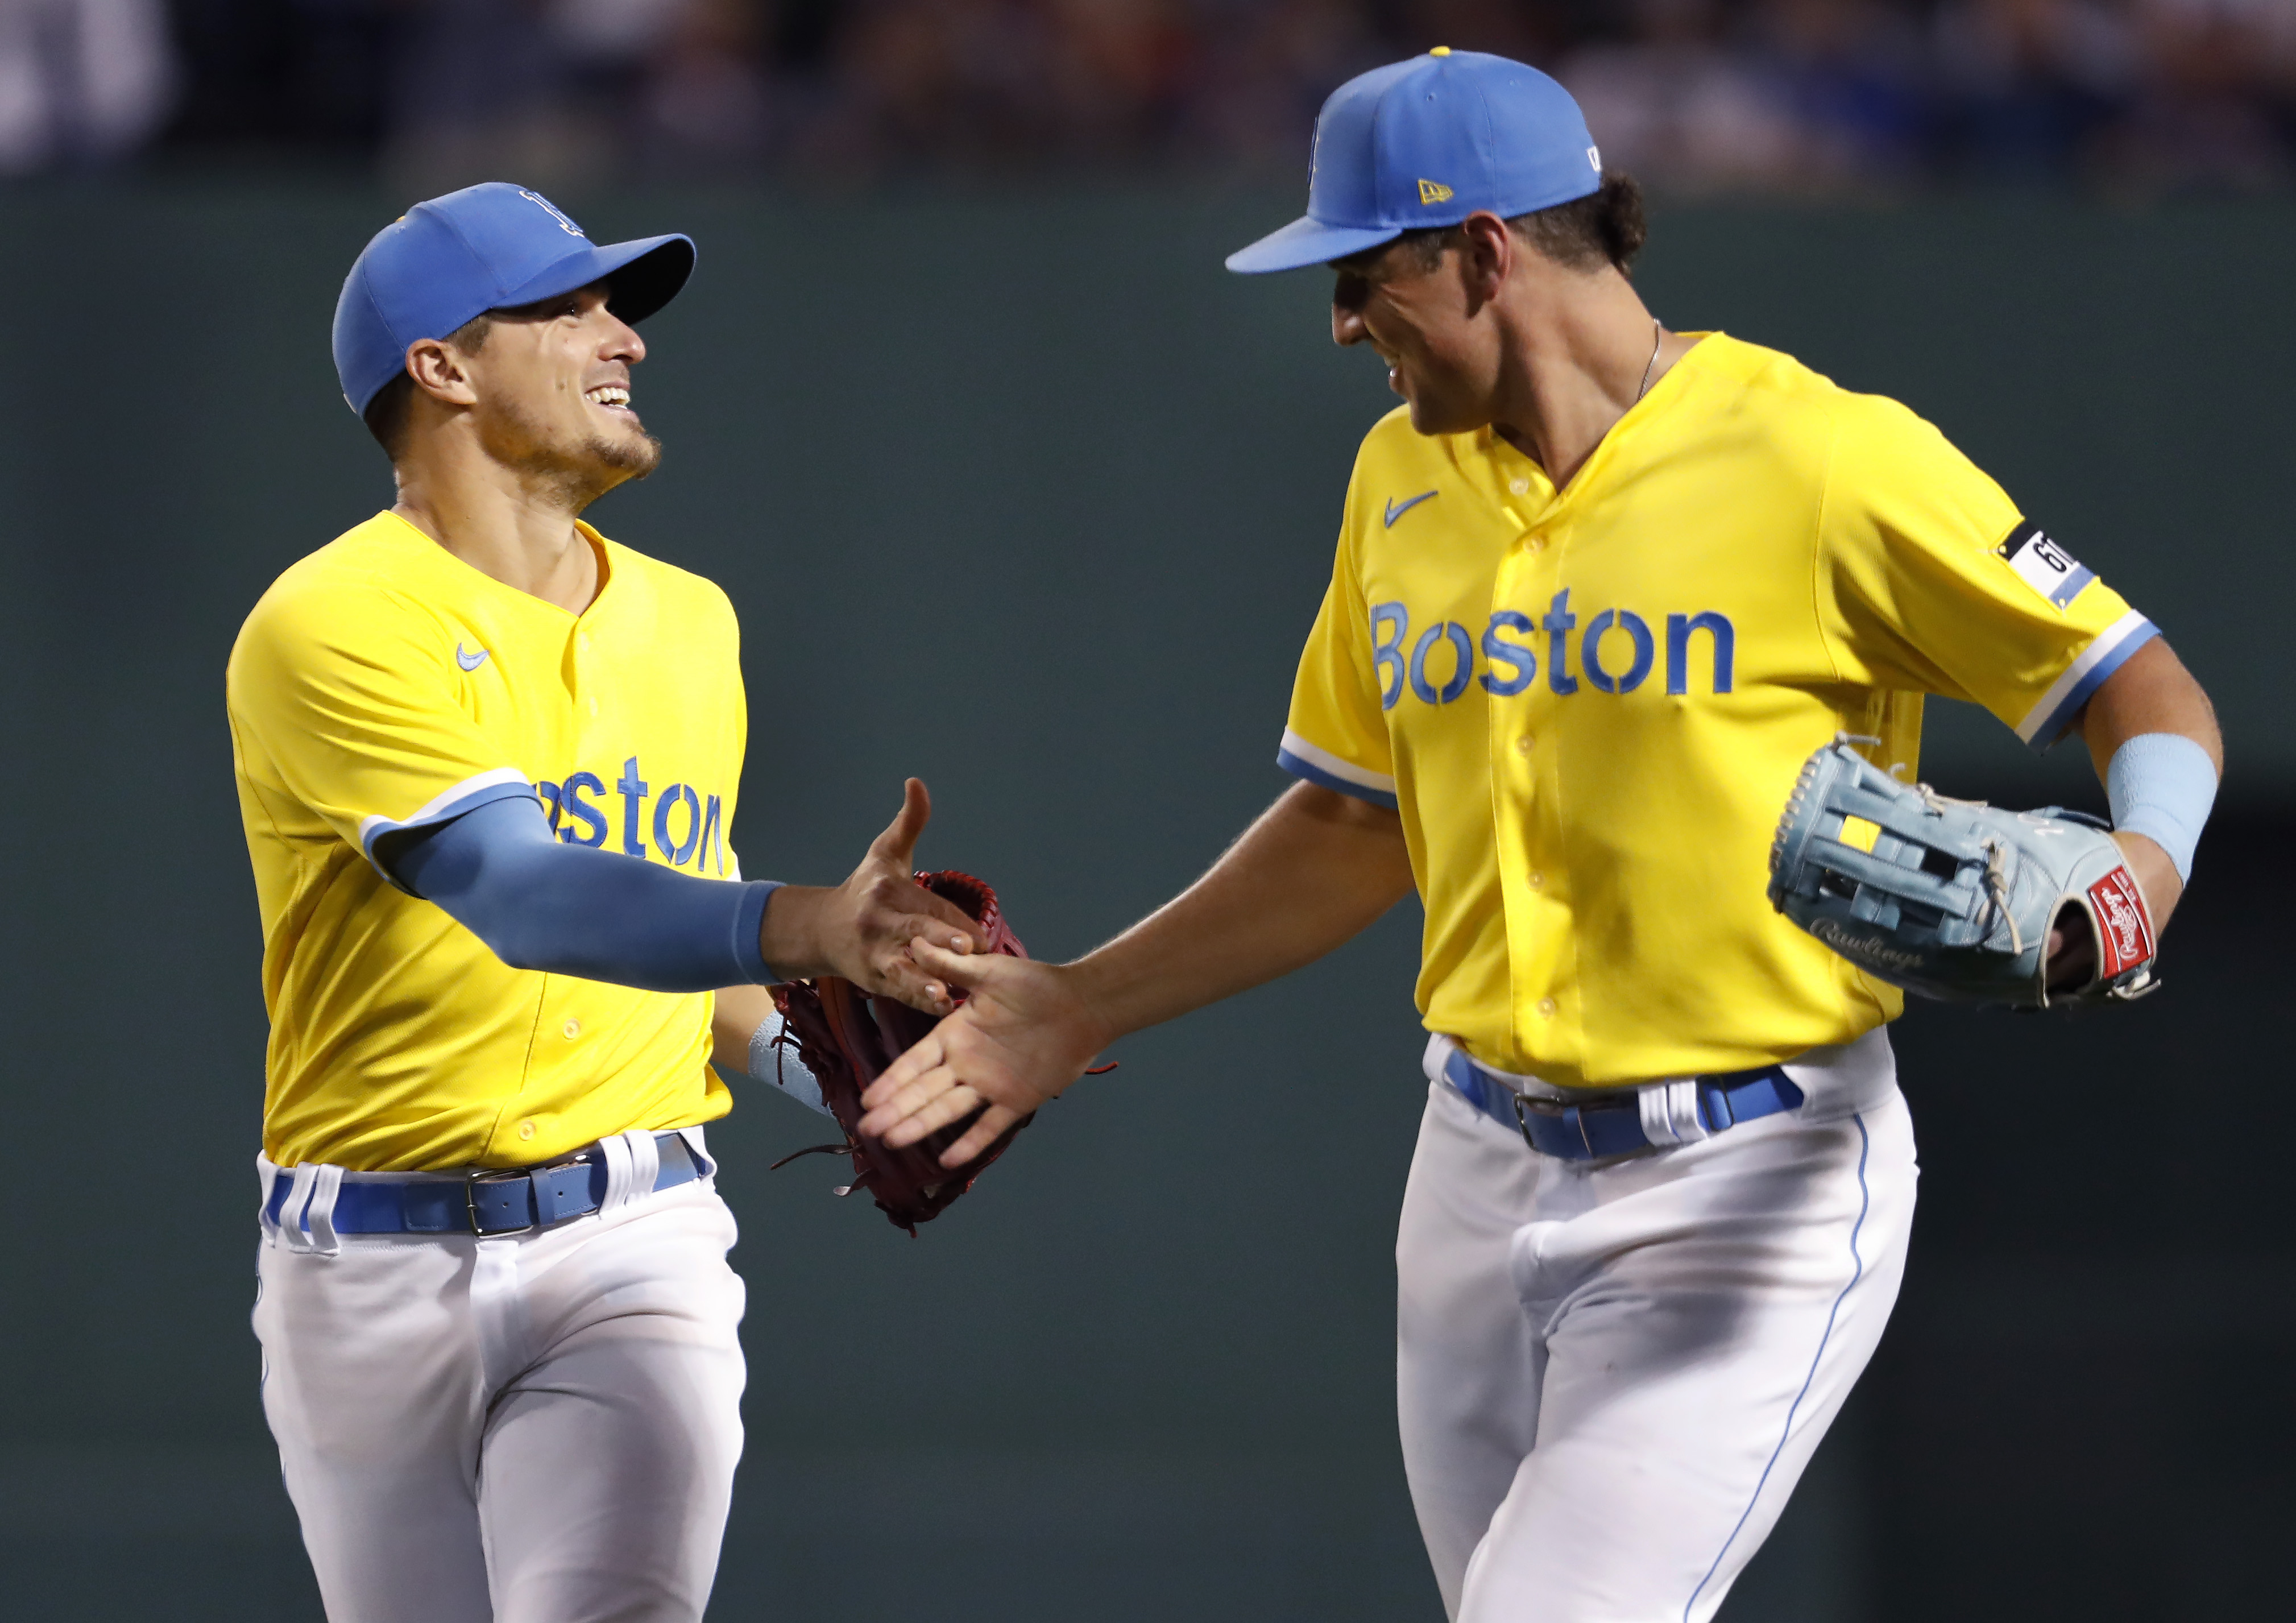 boston red sox in yellow